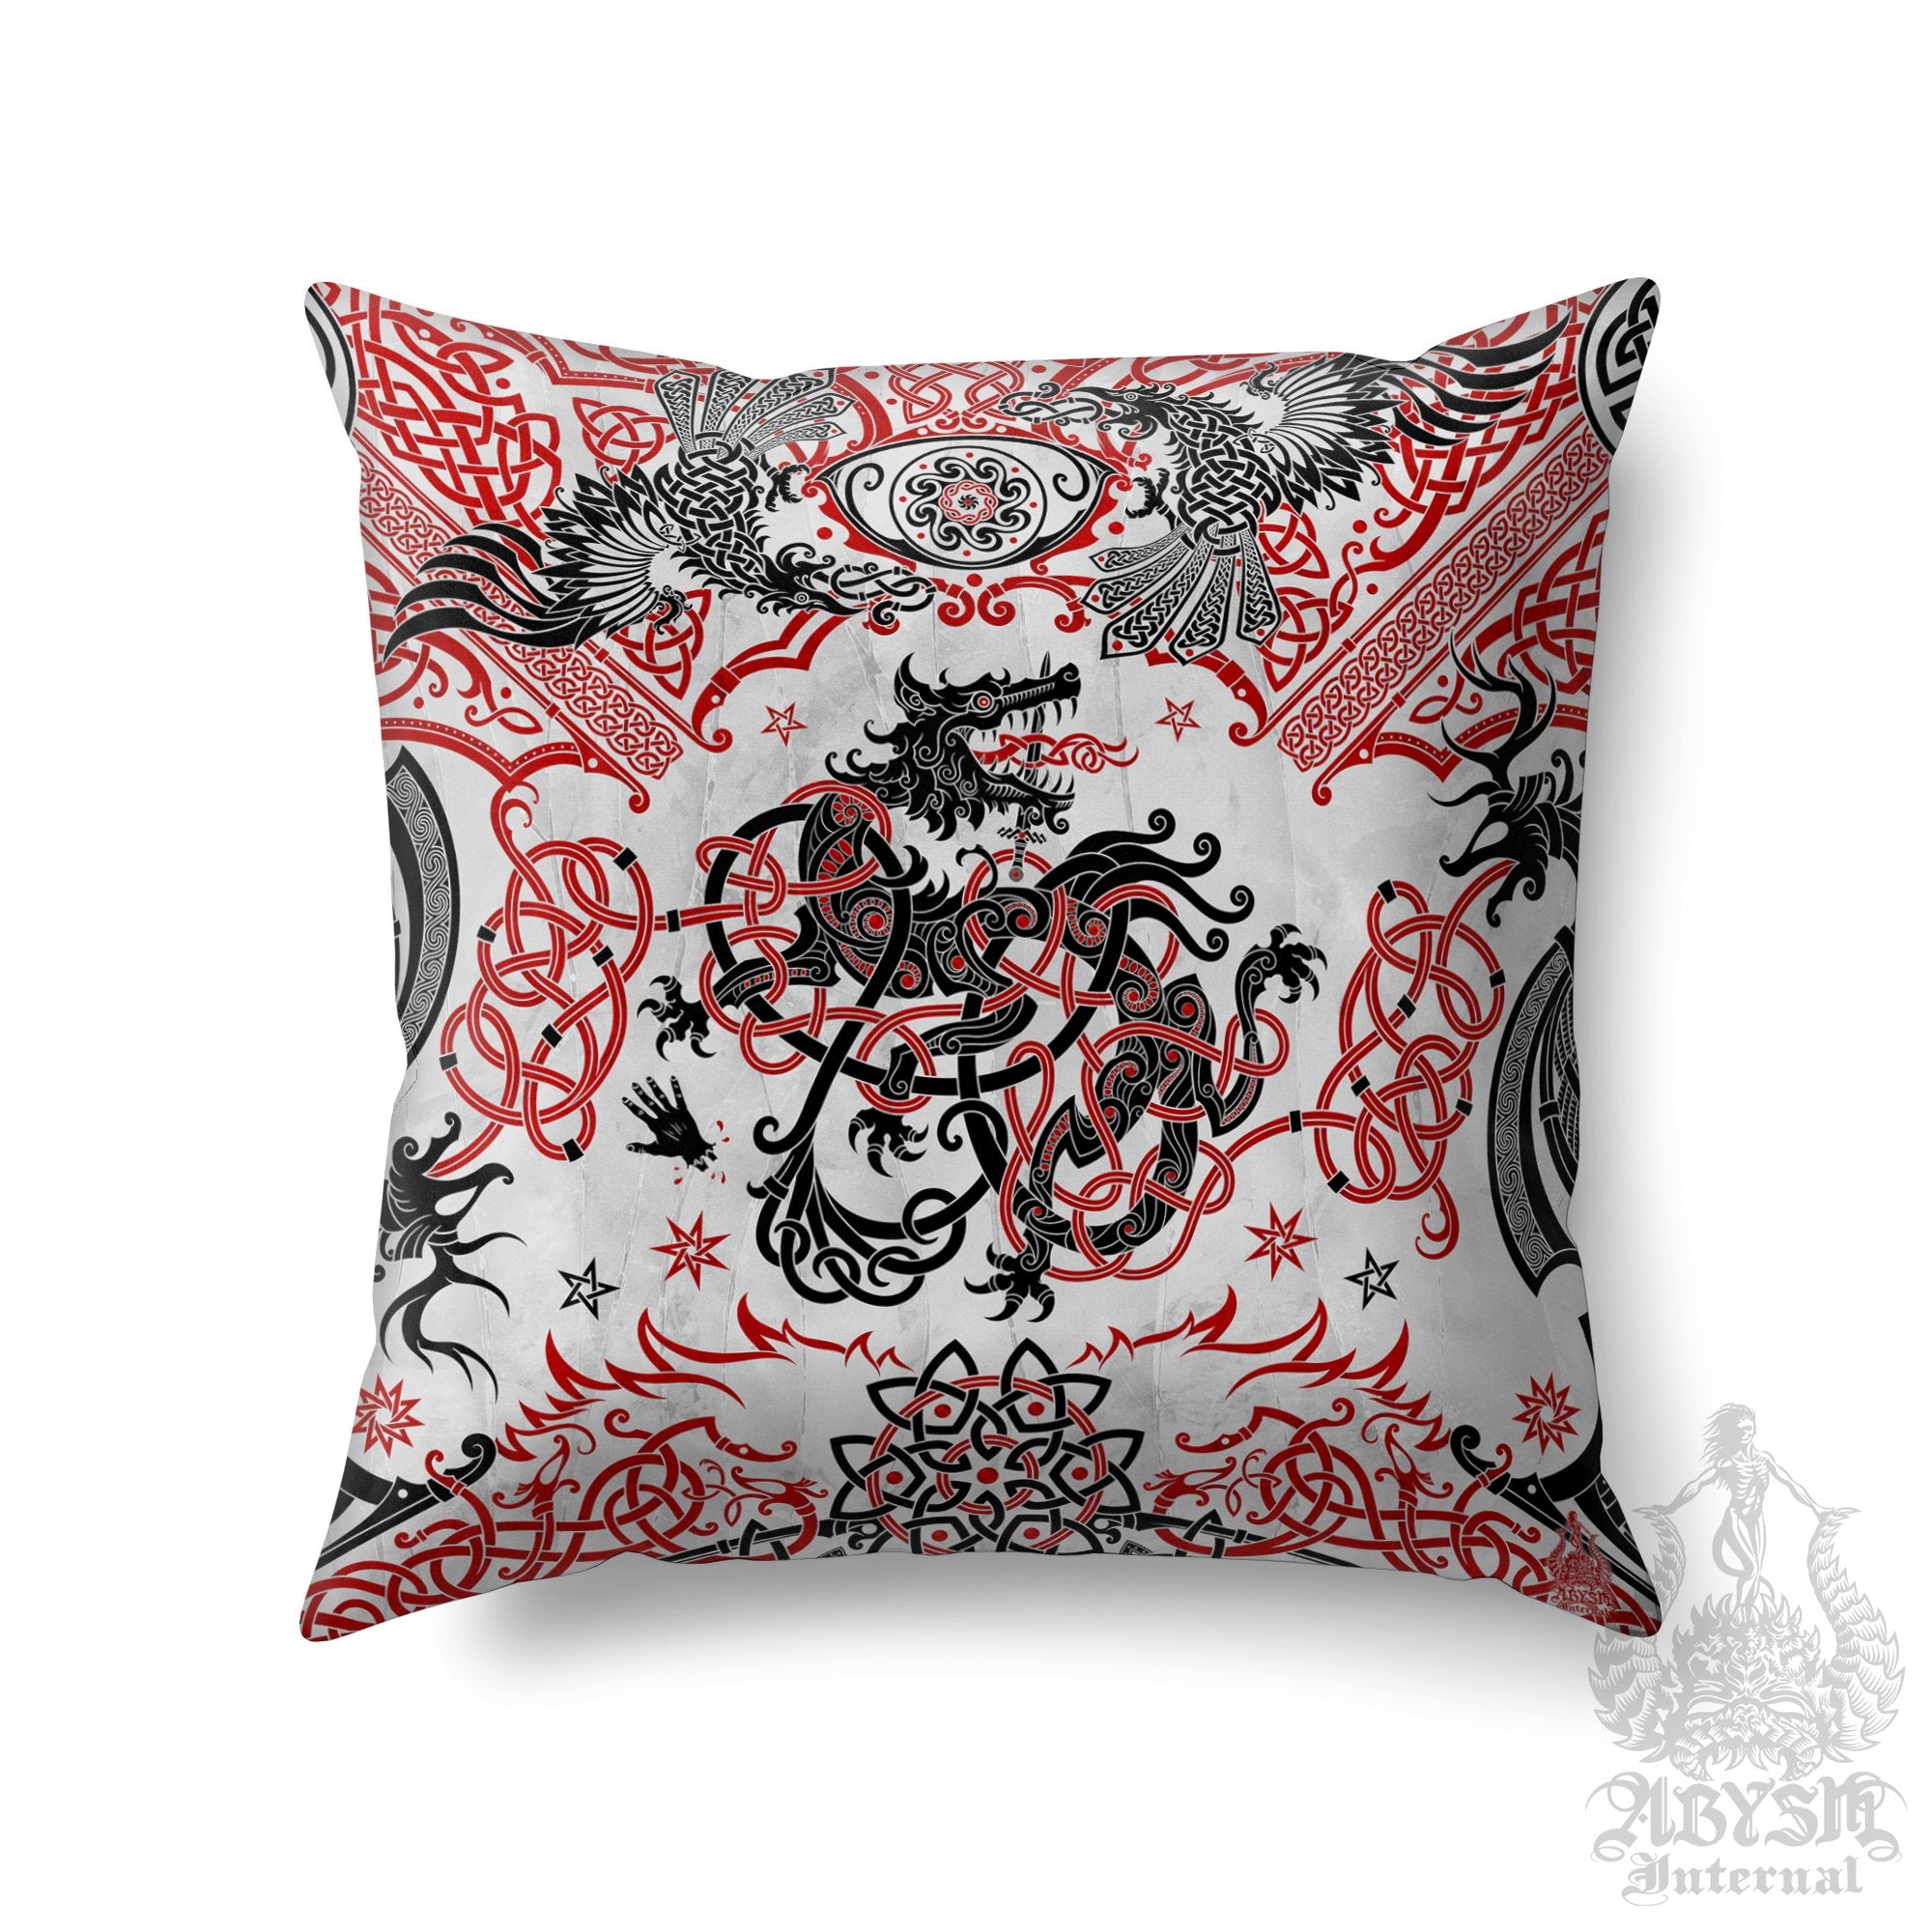 Norse Wolf Throw Pillow, Decorative Accent Pillow, Square Cushion Cover, Nordic Room Decor, Fenrir Knotwork, Viking Art, Alternative Home - Bloody White Black, Red - Abysm Internal